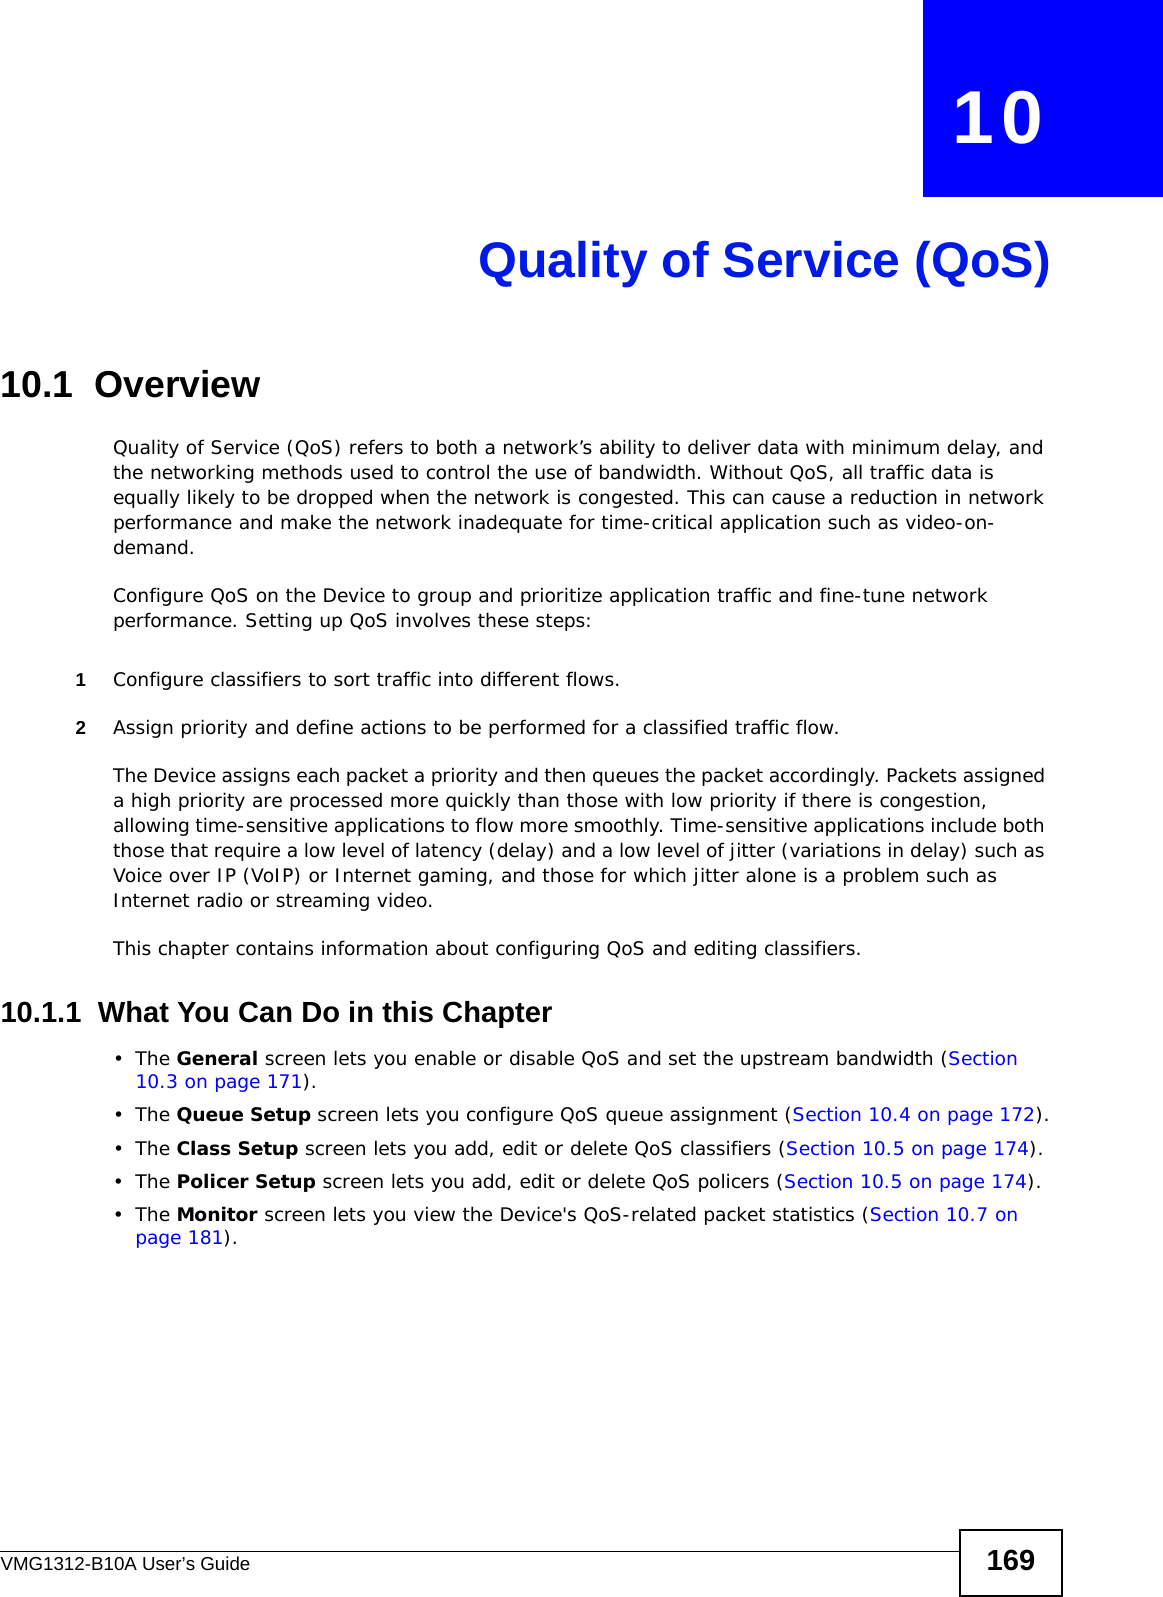 VMG1312-B10A User’s Guide 169CHAPTER   10Quality of Service (QoS)10.1  Overview Quality of Service (QoS) refers to both a network’s ability to deliver data with minimum delay, and the networking methods used to control the use of bandwidth. Without QoS, all traffic data is equally likely to be dropped when the network is congested. This can cause a reduction in network performance and make the network inadequate for time-critical application such as video-on-demand.Configure QoS on the Device to group and prioritize application traffic and fine-tune network performance. Setting up QoS involves these steps:1Configure classifiers to sort traffic into different flows. 2Assign priority and define actions to be performed for a classified traffic flow. The Device assigns each packet a priority and then queues the packet accordingly. Packets assigned a high priority are processed more quickly than those with low priority if there is congestion, allowing time-sensitive applications to flow more smoothly. Time-sensitive applications include both those that require a low level of latency (delay) and a low level of jitter (variations in delay) such as Voice over IP (VoIP) or Internet gaming, and those for which jitter alone is a problem such as Internet radio or streaming video.This chapter contains information about configuring QoS and editing classifiers.10.1.1  What You Can Do in this Chapter•The General screen lets you enable or disable QoS and set the upstream bandwidth (Section 10.3 on page 171).•The Queue Setup screen lets you configure QoS queue assignment (Section 10.4 on page 172).•The Class Setup screen lets you add, edit or delete QoS classifiers (Section 10.5 on page 174).•The Policer Setup screen lets you add, edit or delete QoS policers (Section 10.5 on page 174).•The Monitor screen lets you view the Device&apos;s QoS-related packet statistics (Section 10.7 on page 181).